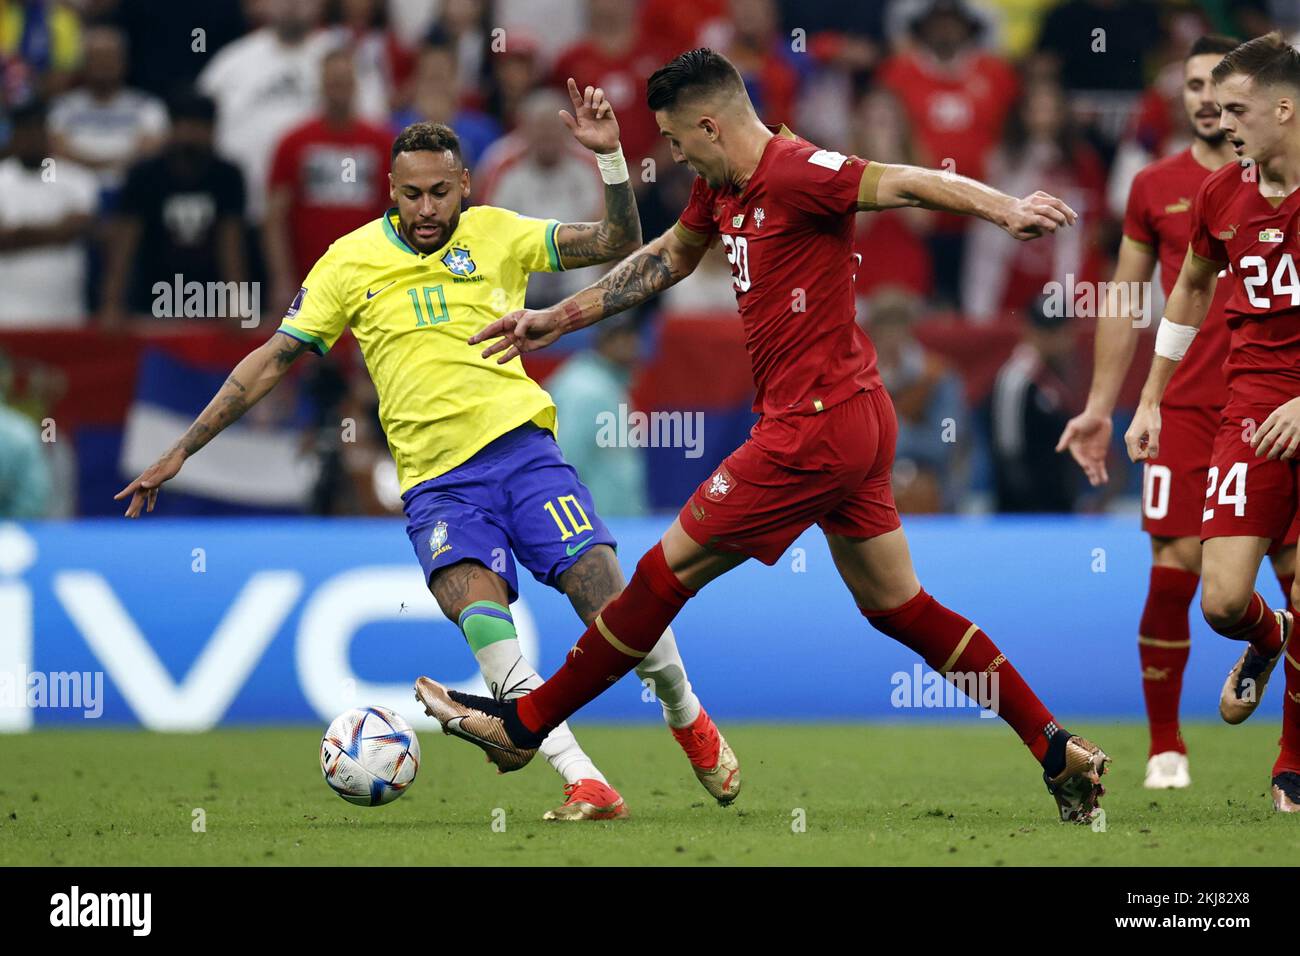 LUSAIL CITY - (l-r) Neymar of Brazil, Sergej Milinkovic-Savic of Serbia during the FIFA World Cup Qatar 2022 group G match between Brazil and Serbia at Lusail Stadium on November 24, 2022 in Lusail City, Qatar. AP | Dutch Height | MAURICE OF STONE Credit: ANP/Alamy Live News Stock Photo